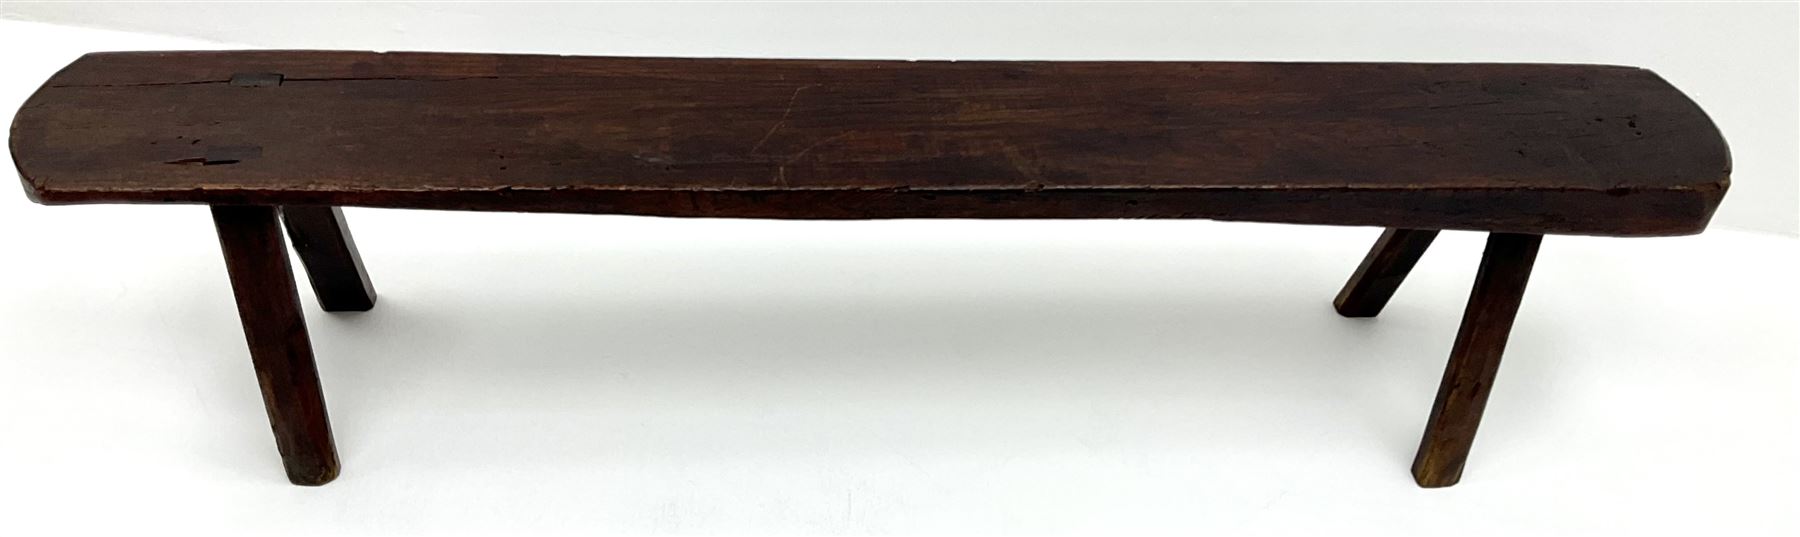 18th/19th century vernacular rustic oak plank bench on four splayed supports - Image 2 of 3